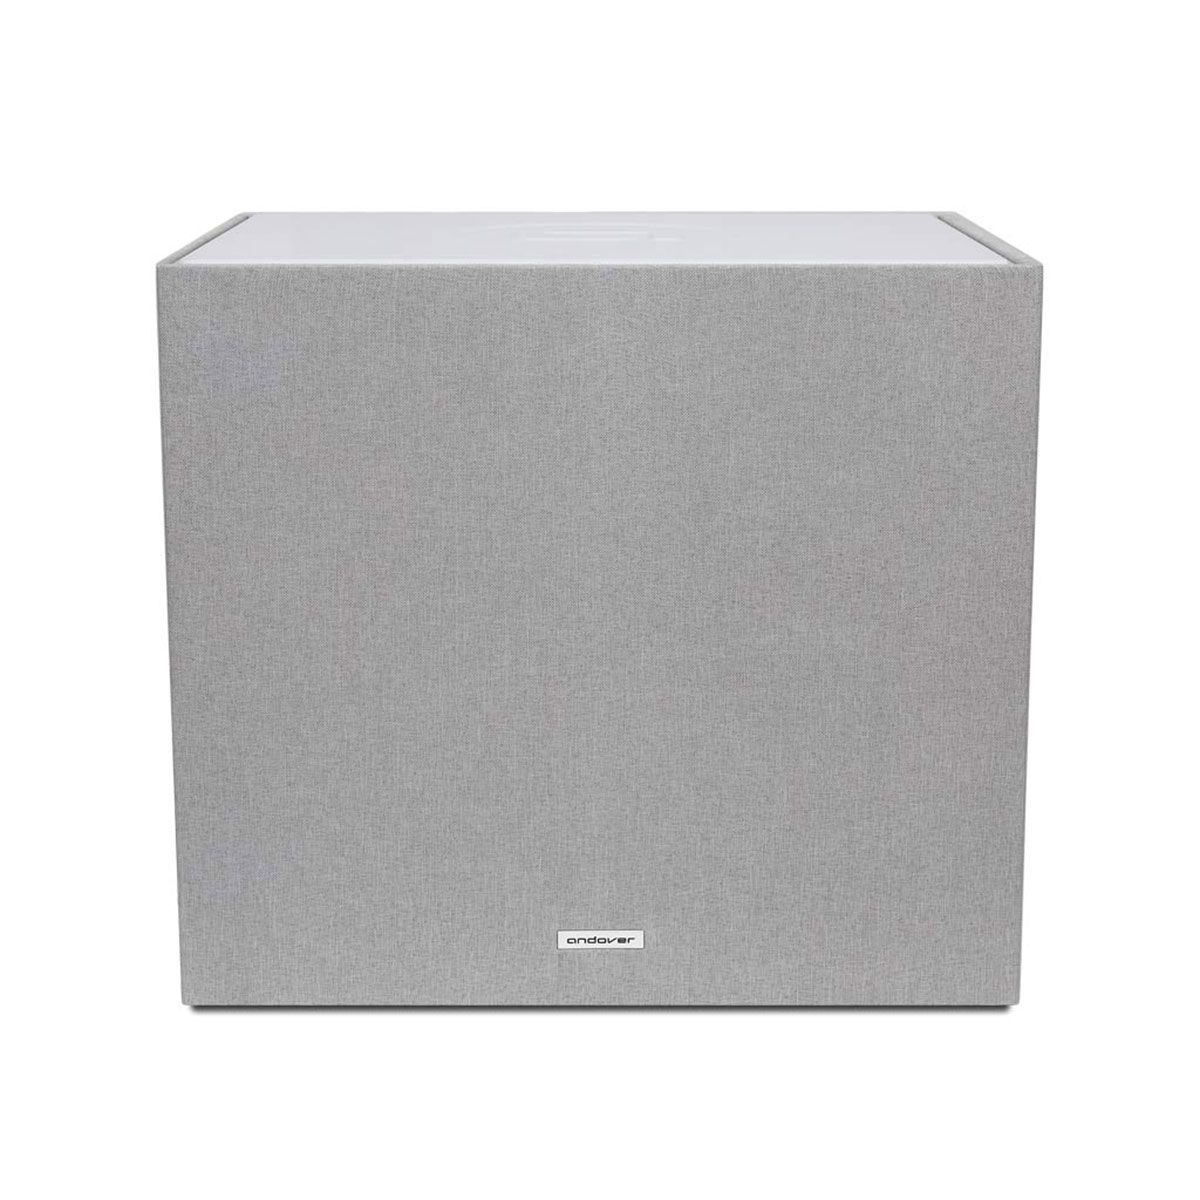 Andover Audio Spinsub Subwoofer - White front angled